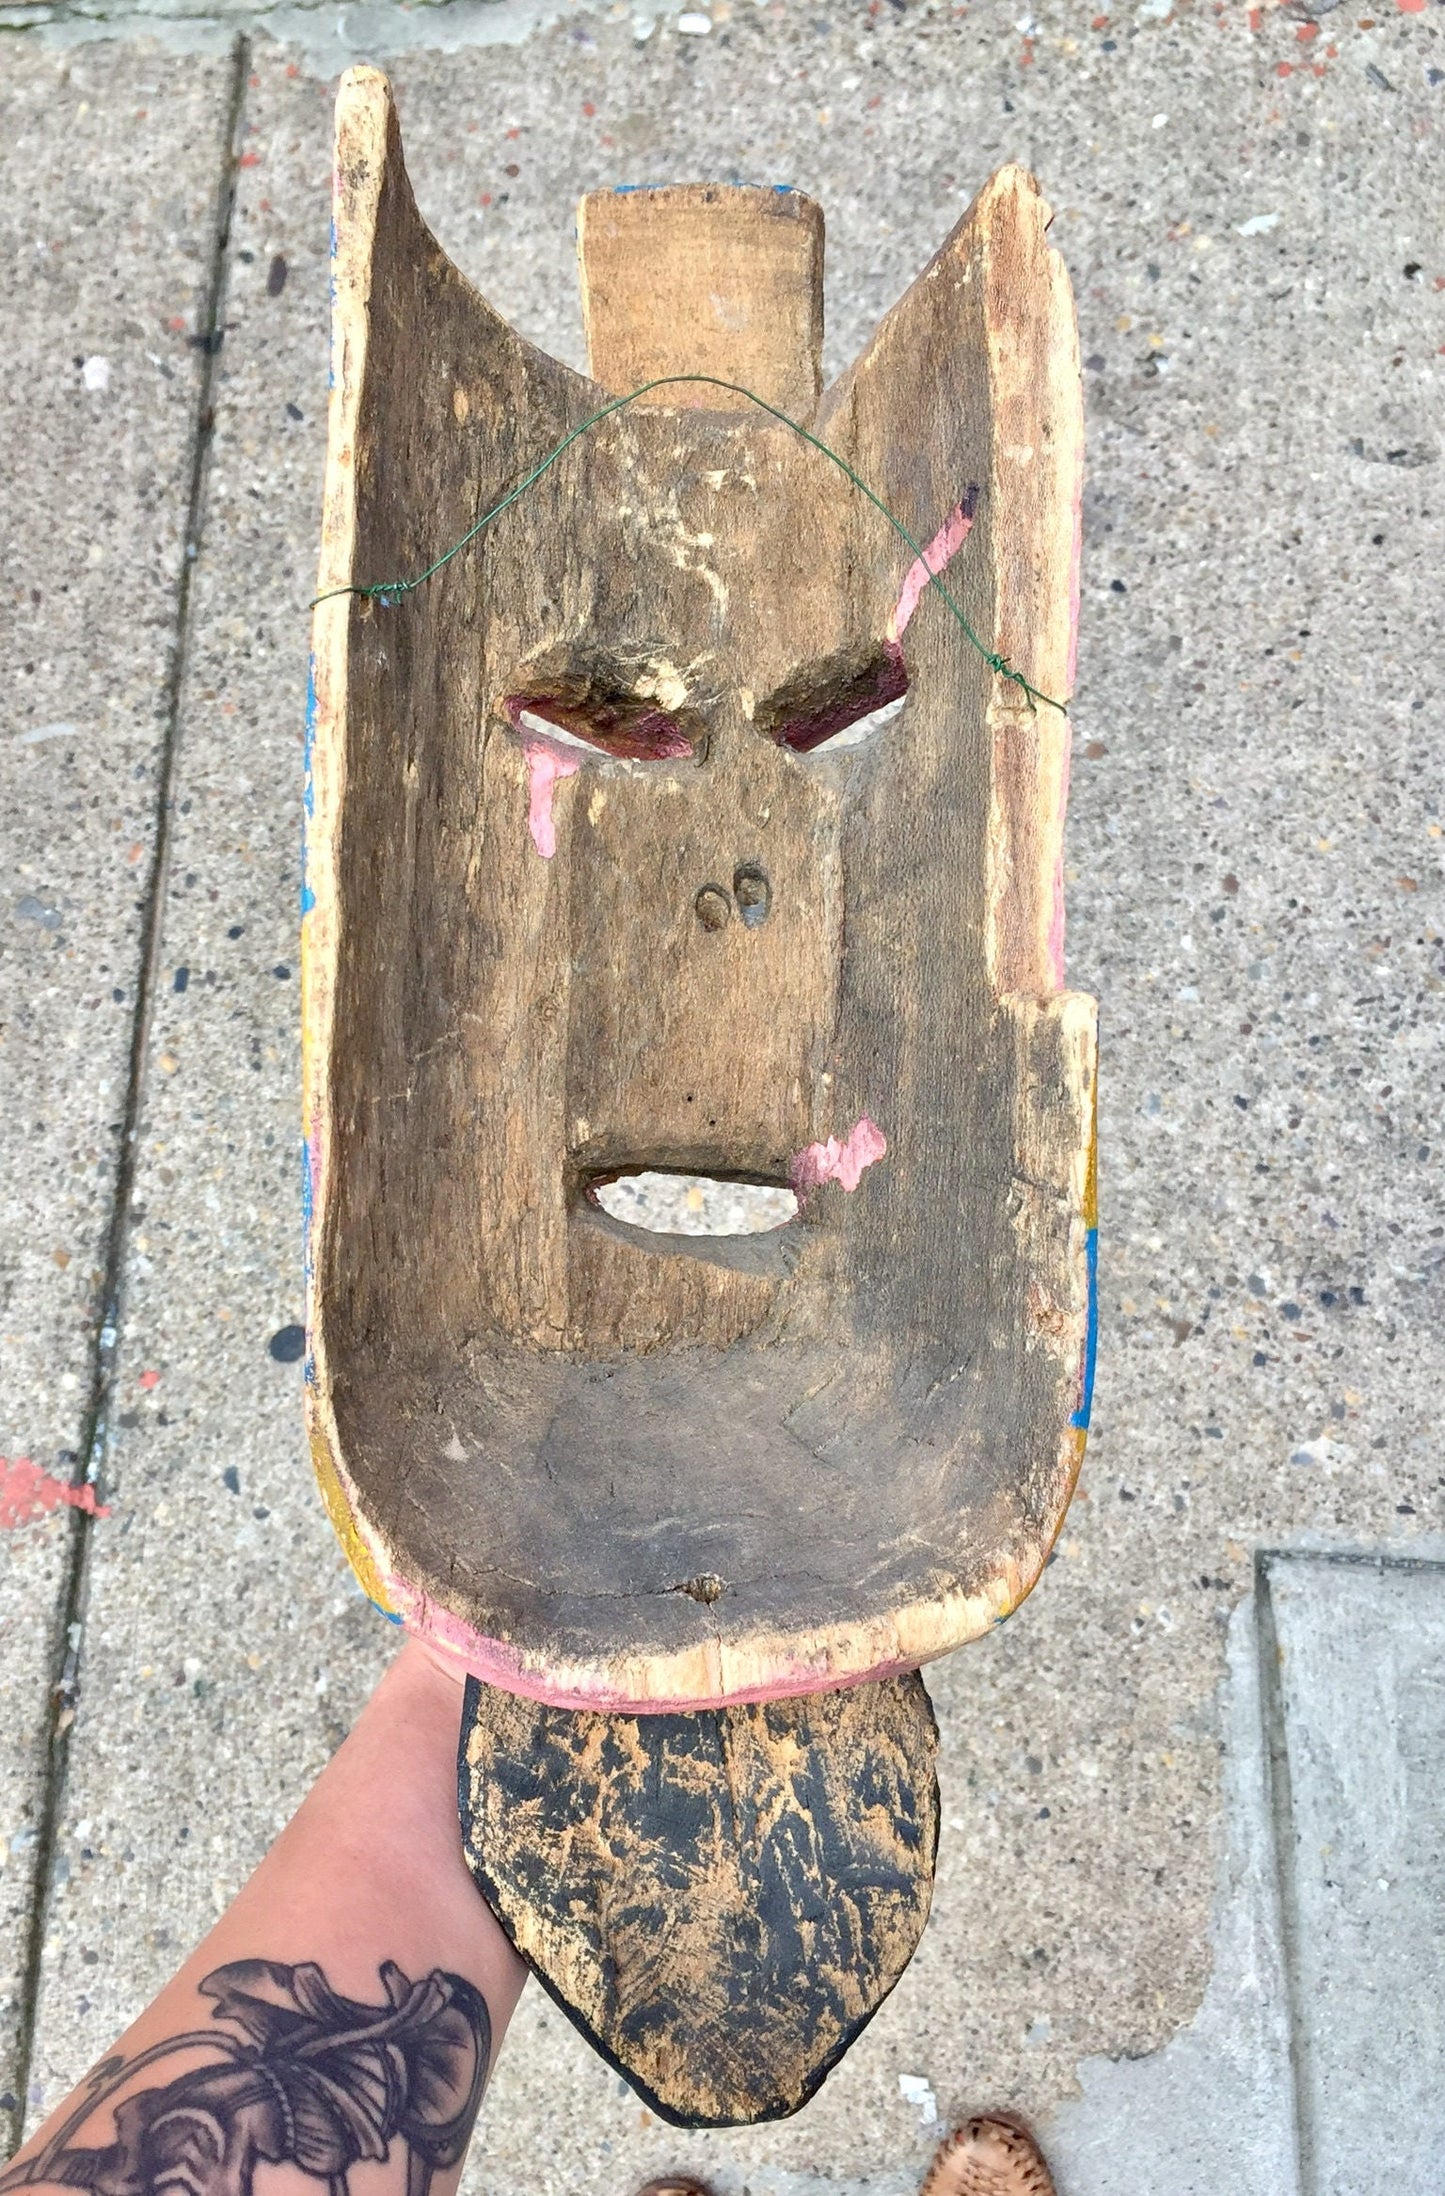 Vintage hand-carved wooden mask with painted details, mounted on concrete, alongside a person's tattooed arm and leg.